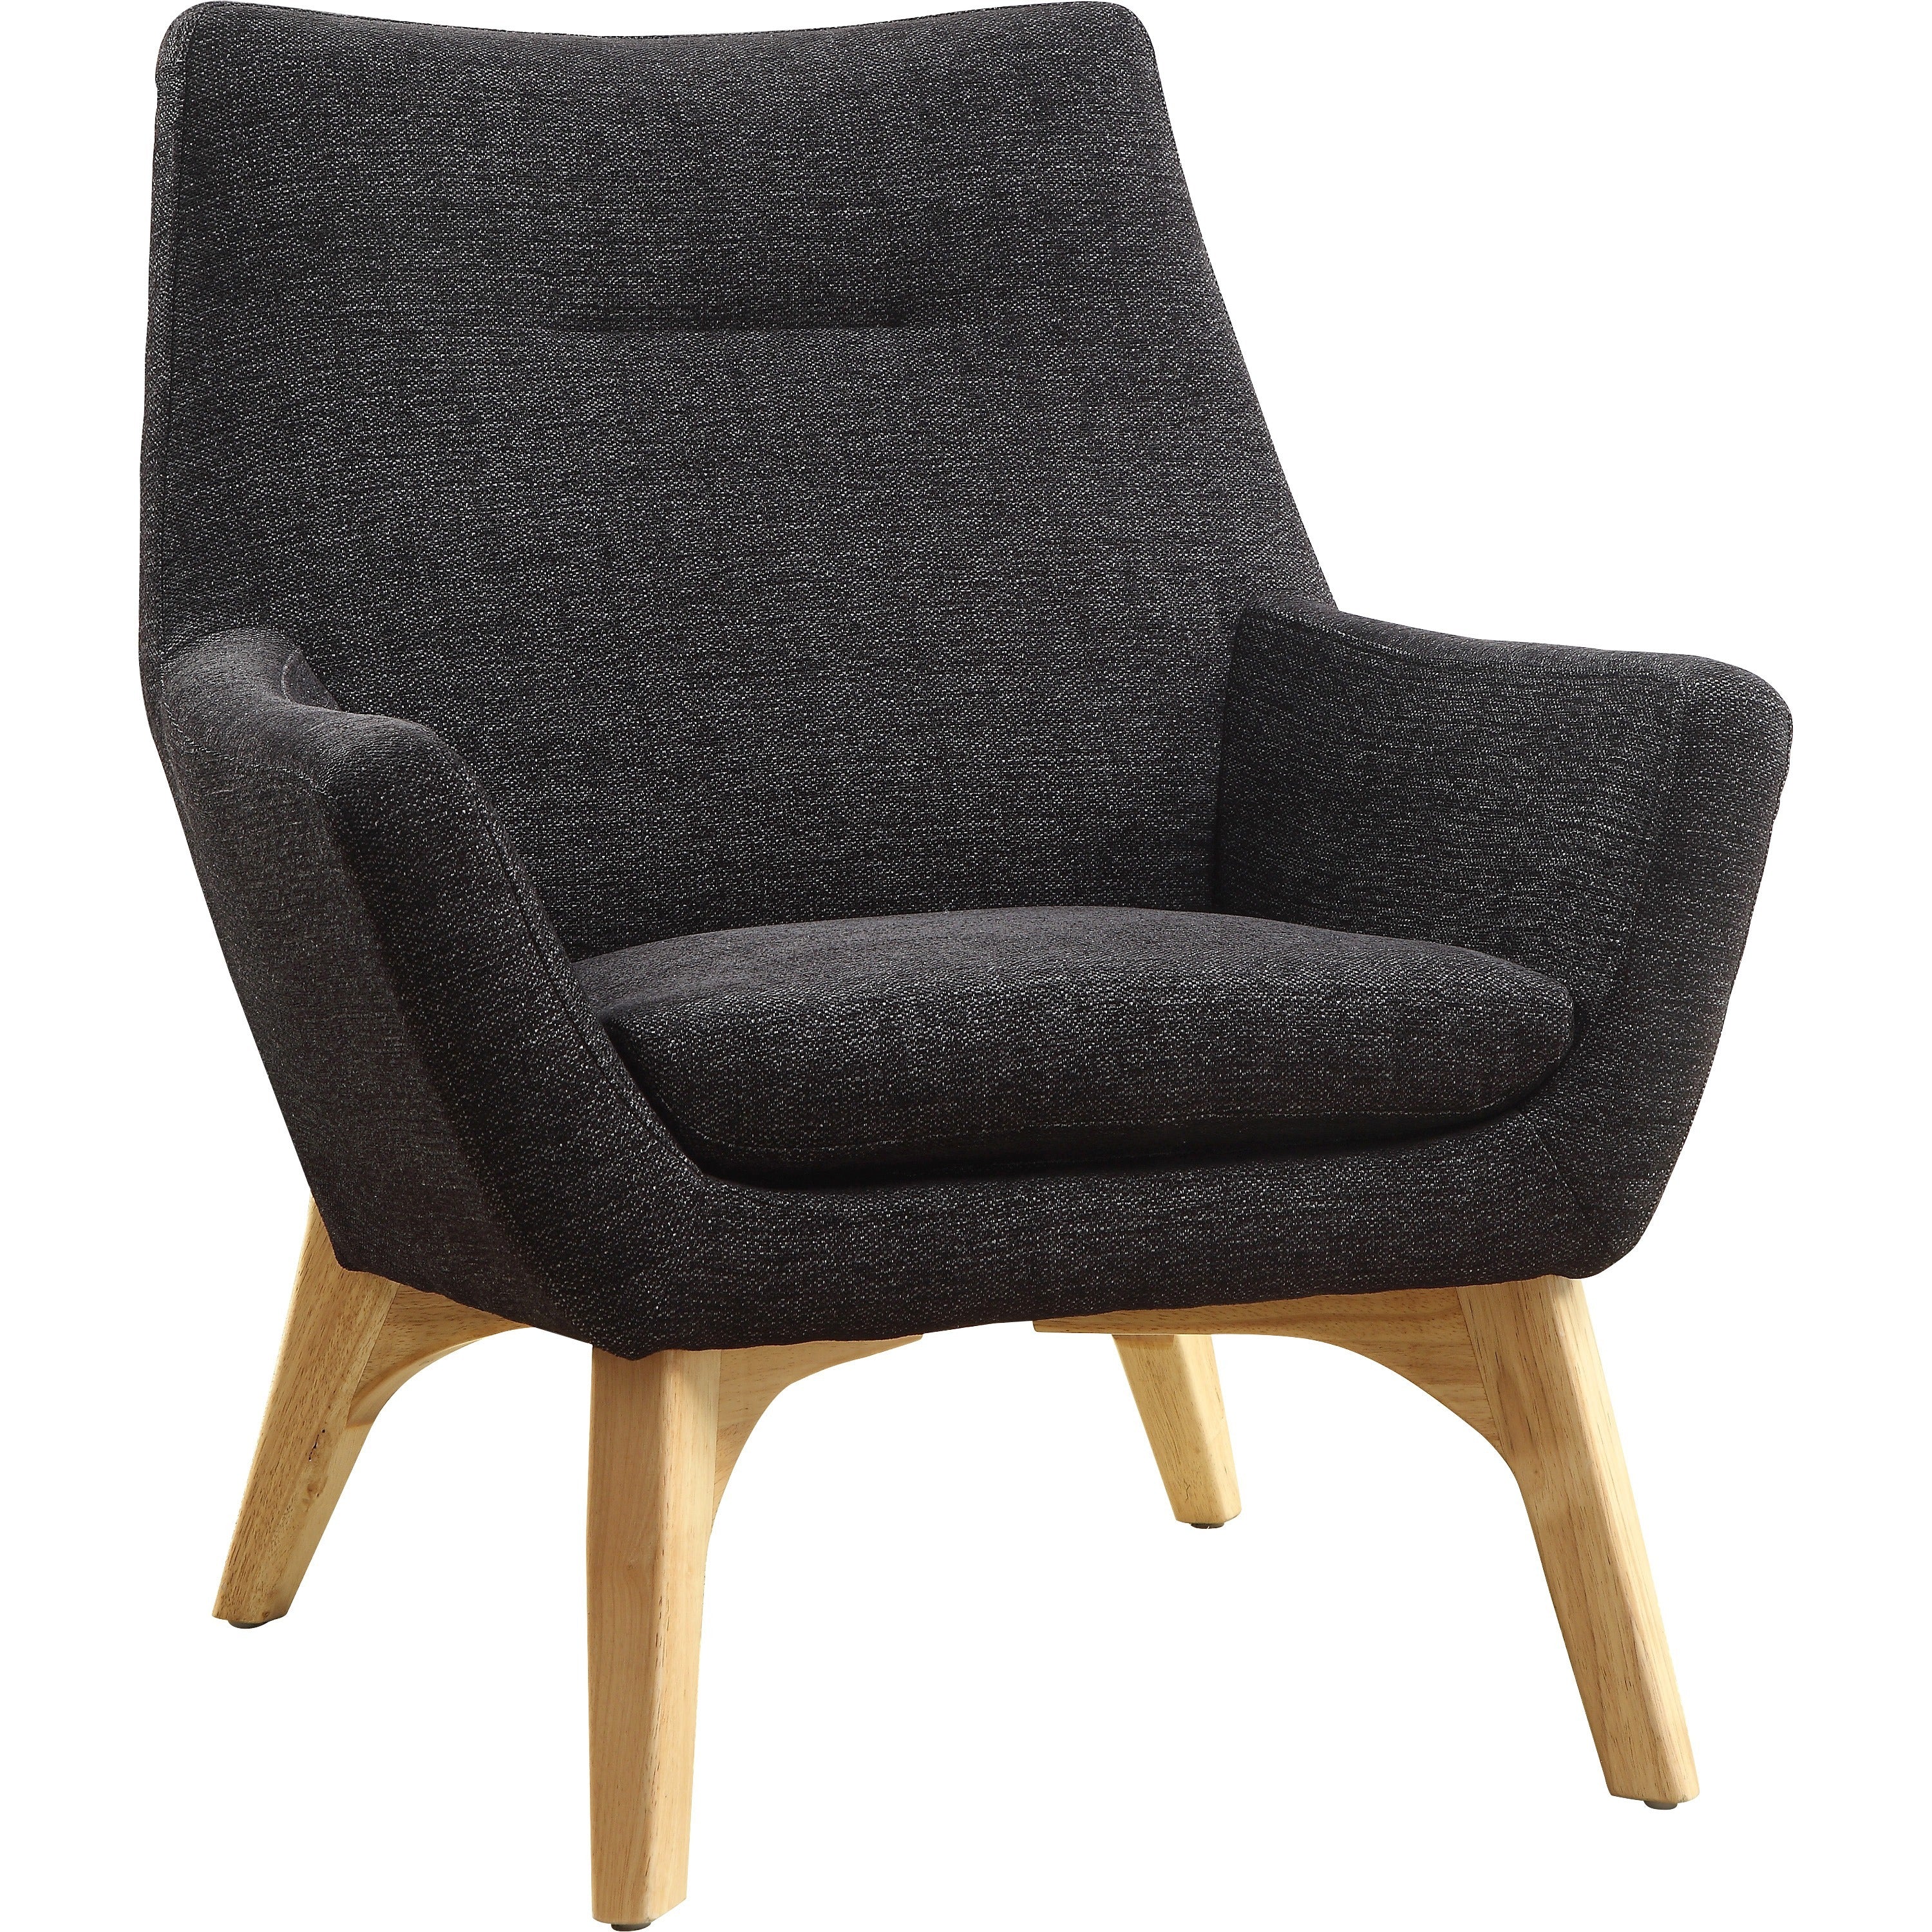 lorell-quintessence-collection-upholstered-chair-black-seat-black-back-low-back-four-legged-base-1-each_llr68958 - 1